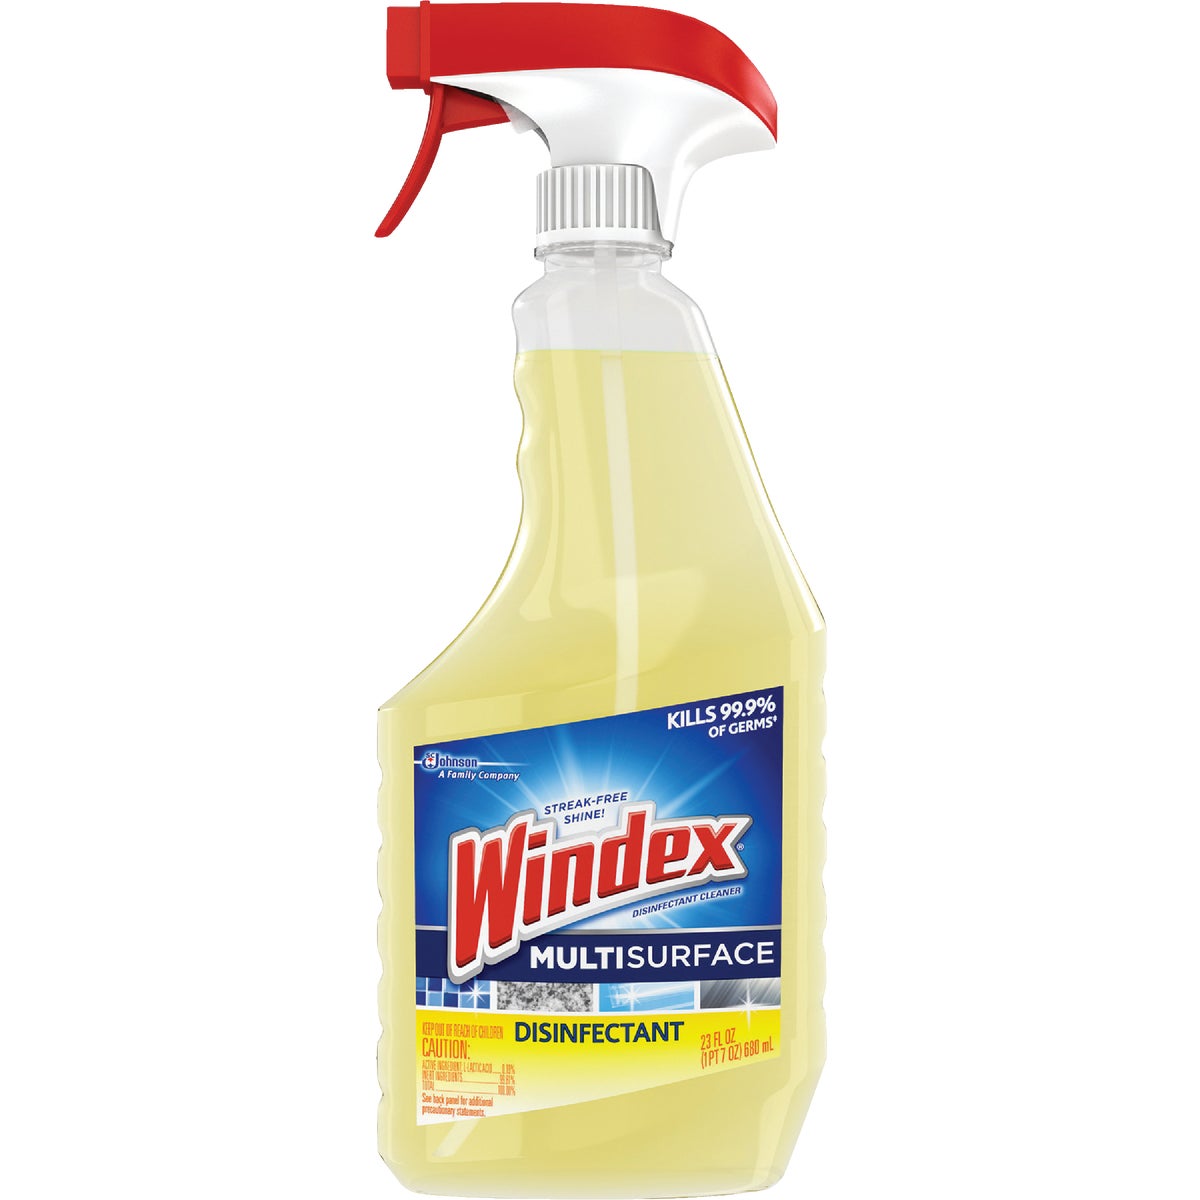 Windex 23 Oz. Multi-Surface Disinfectant Cleaner